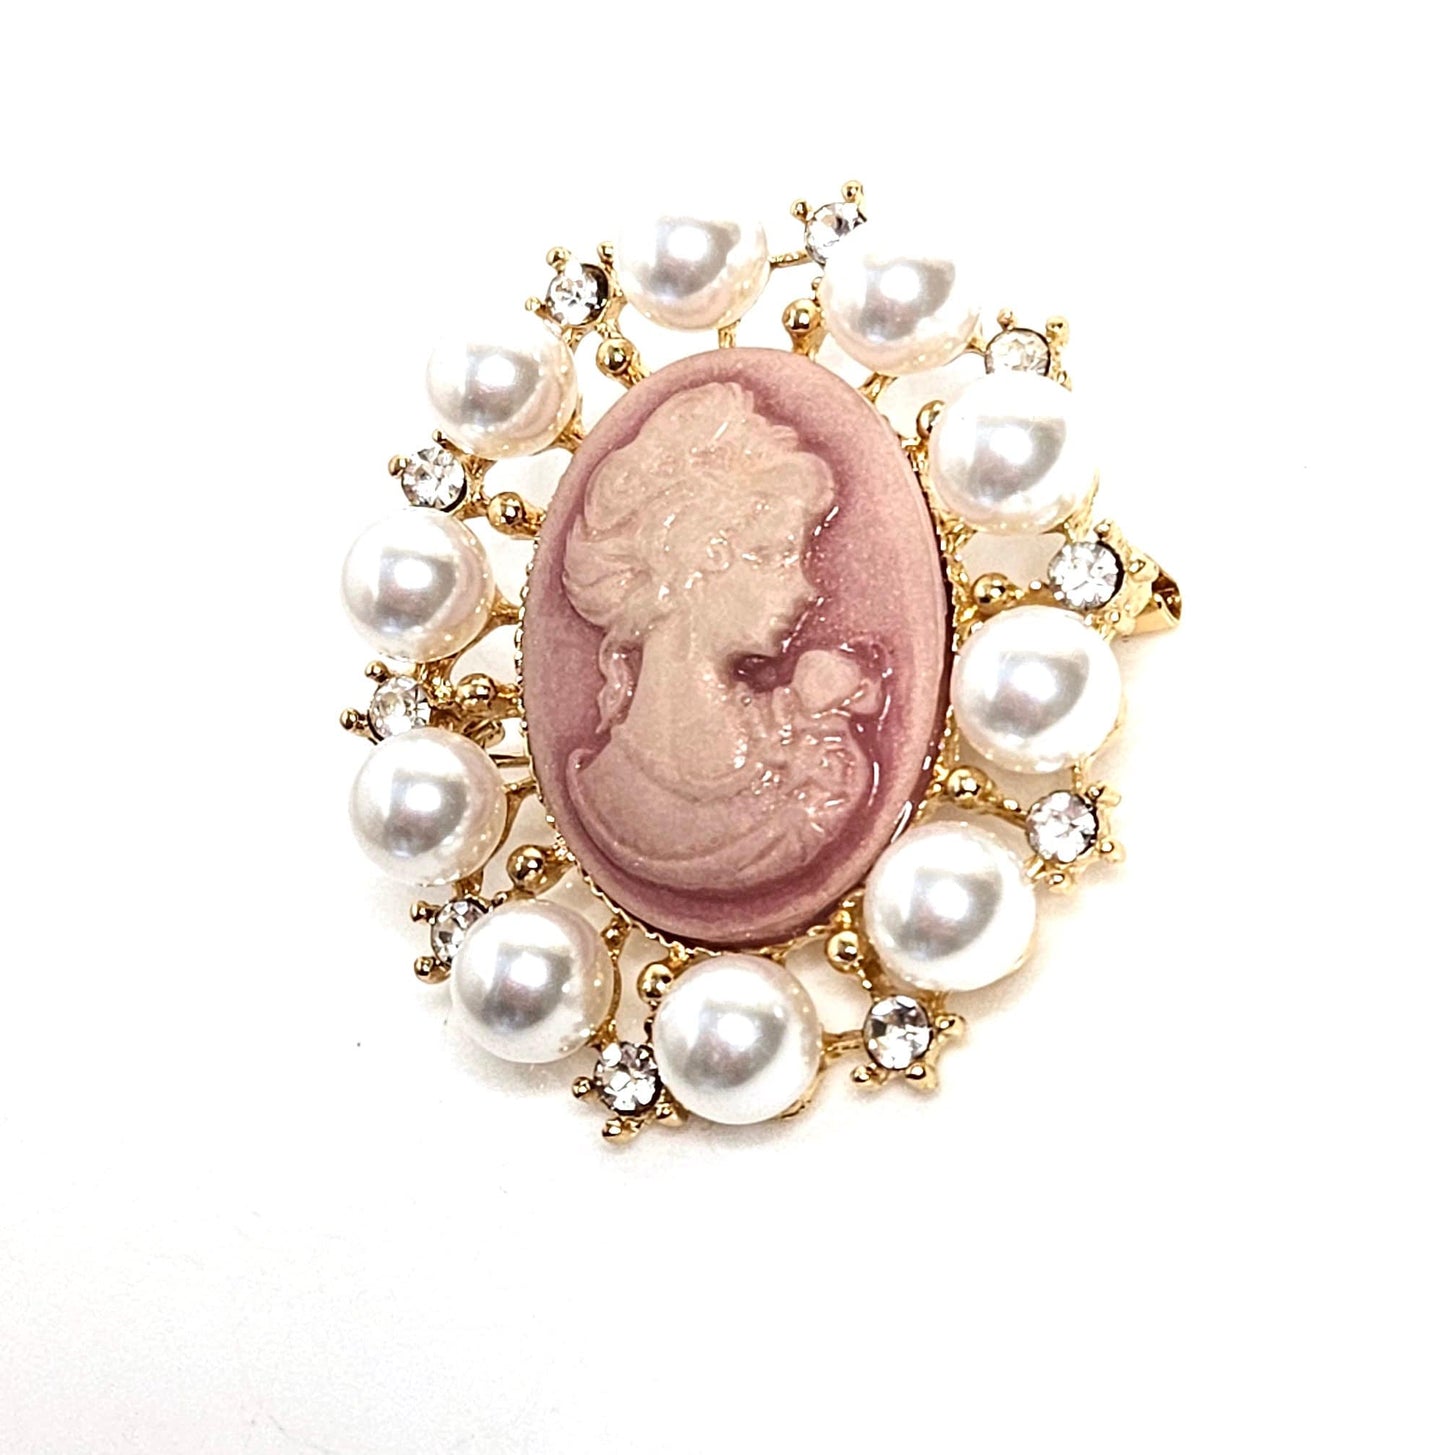 Gorgeous Pink Gold Cameo Brooch, Victorian Pearl Lady Brooch, Crystal Jewelry, Stylish Cameo Pin, Brooches For Women